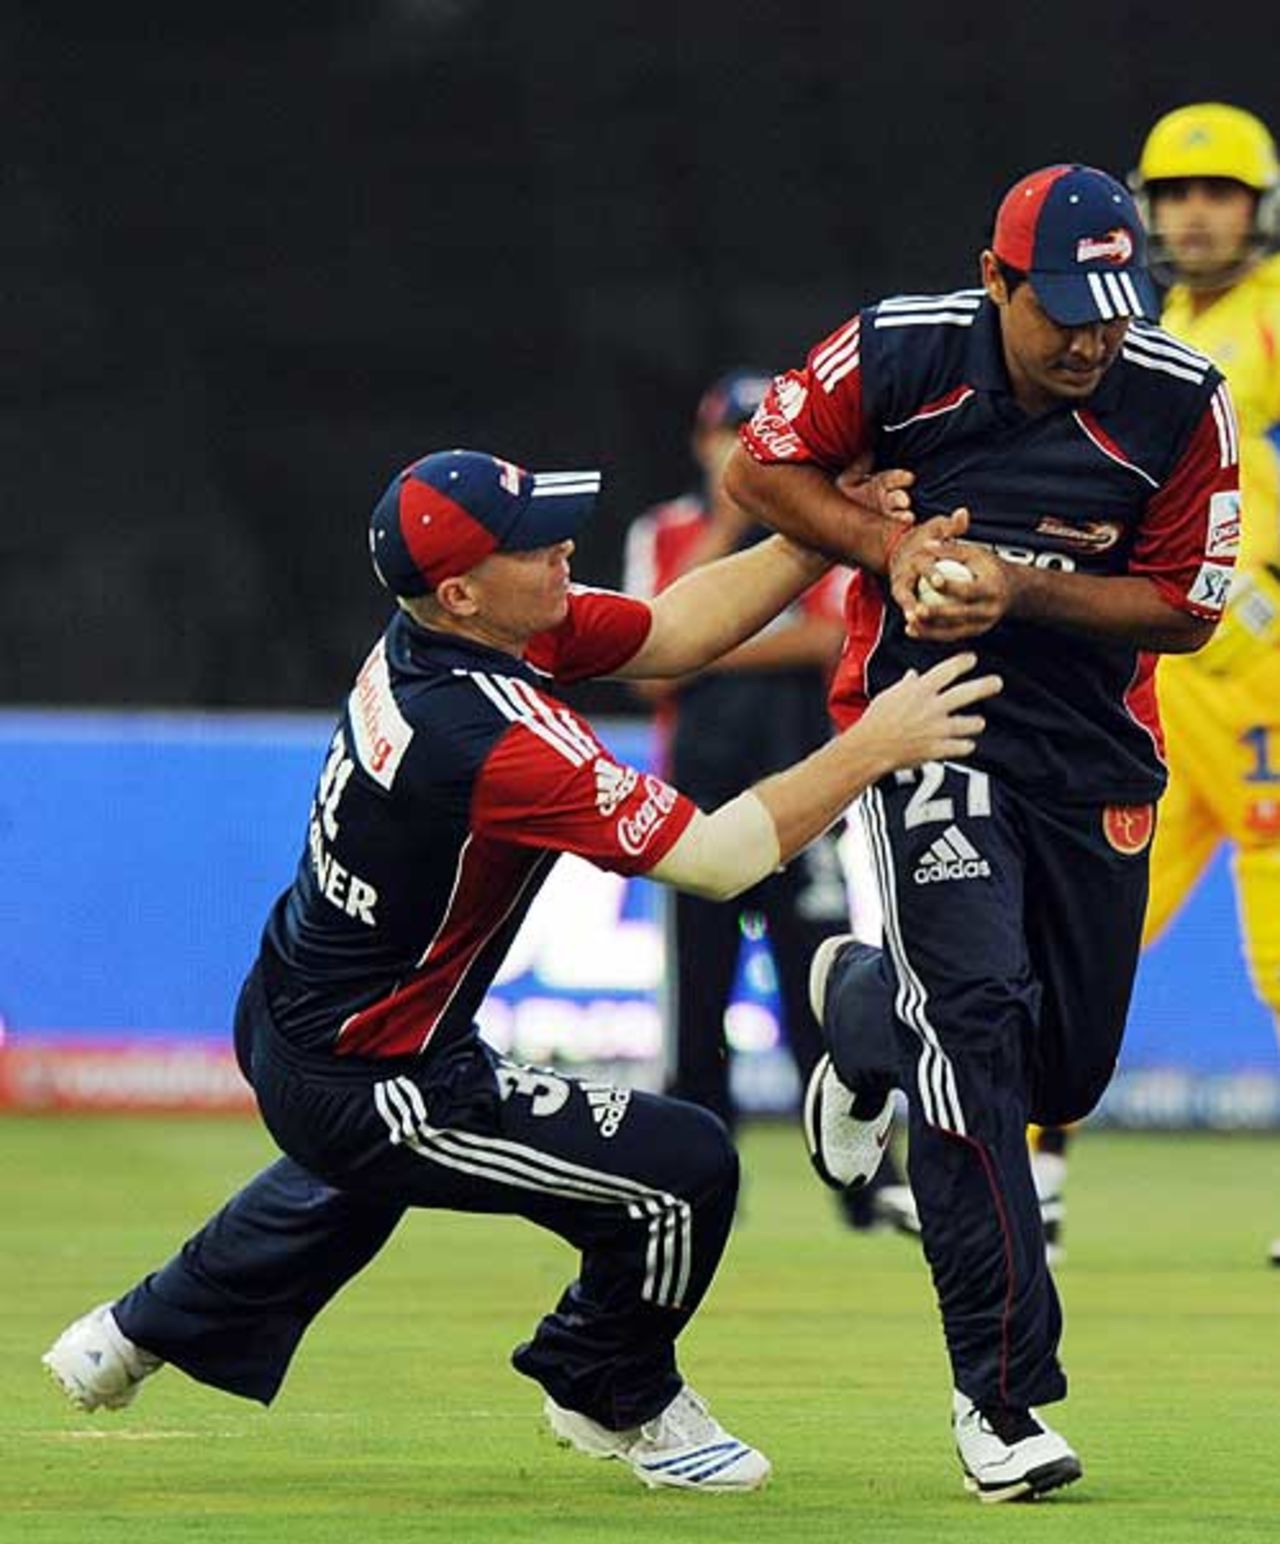 David Warner and Rajat Bhatia collide for a catch, Chennai Super Kings v Delhi Daredevils, IPL, 26th match, Johannesburg, May 2, 2009